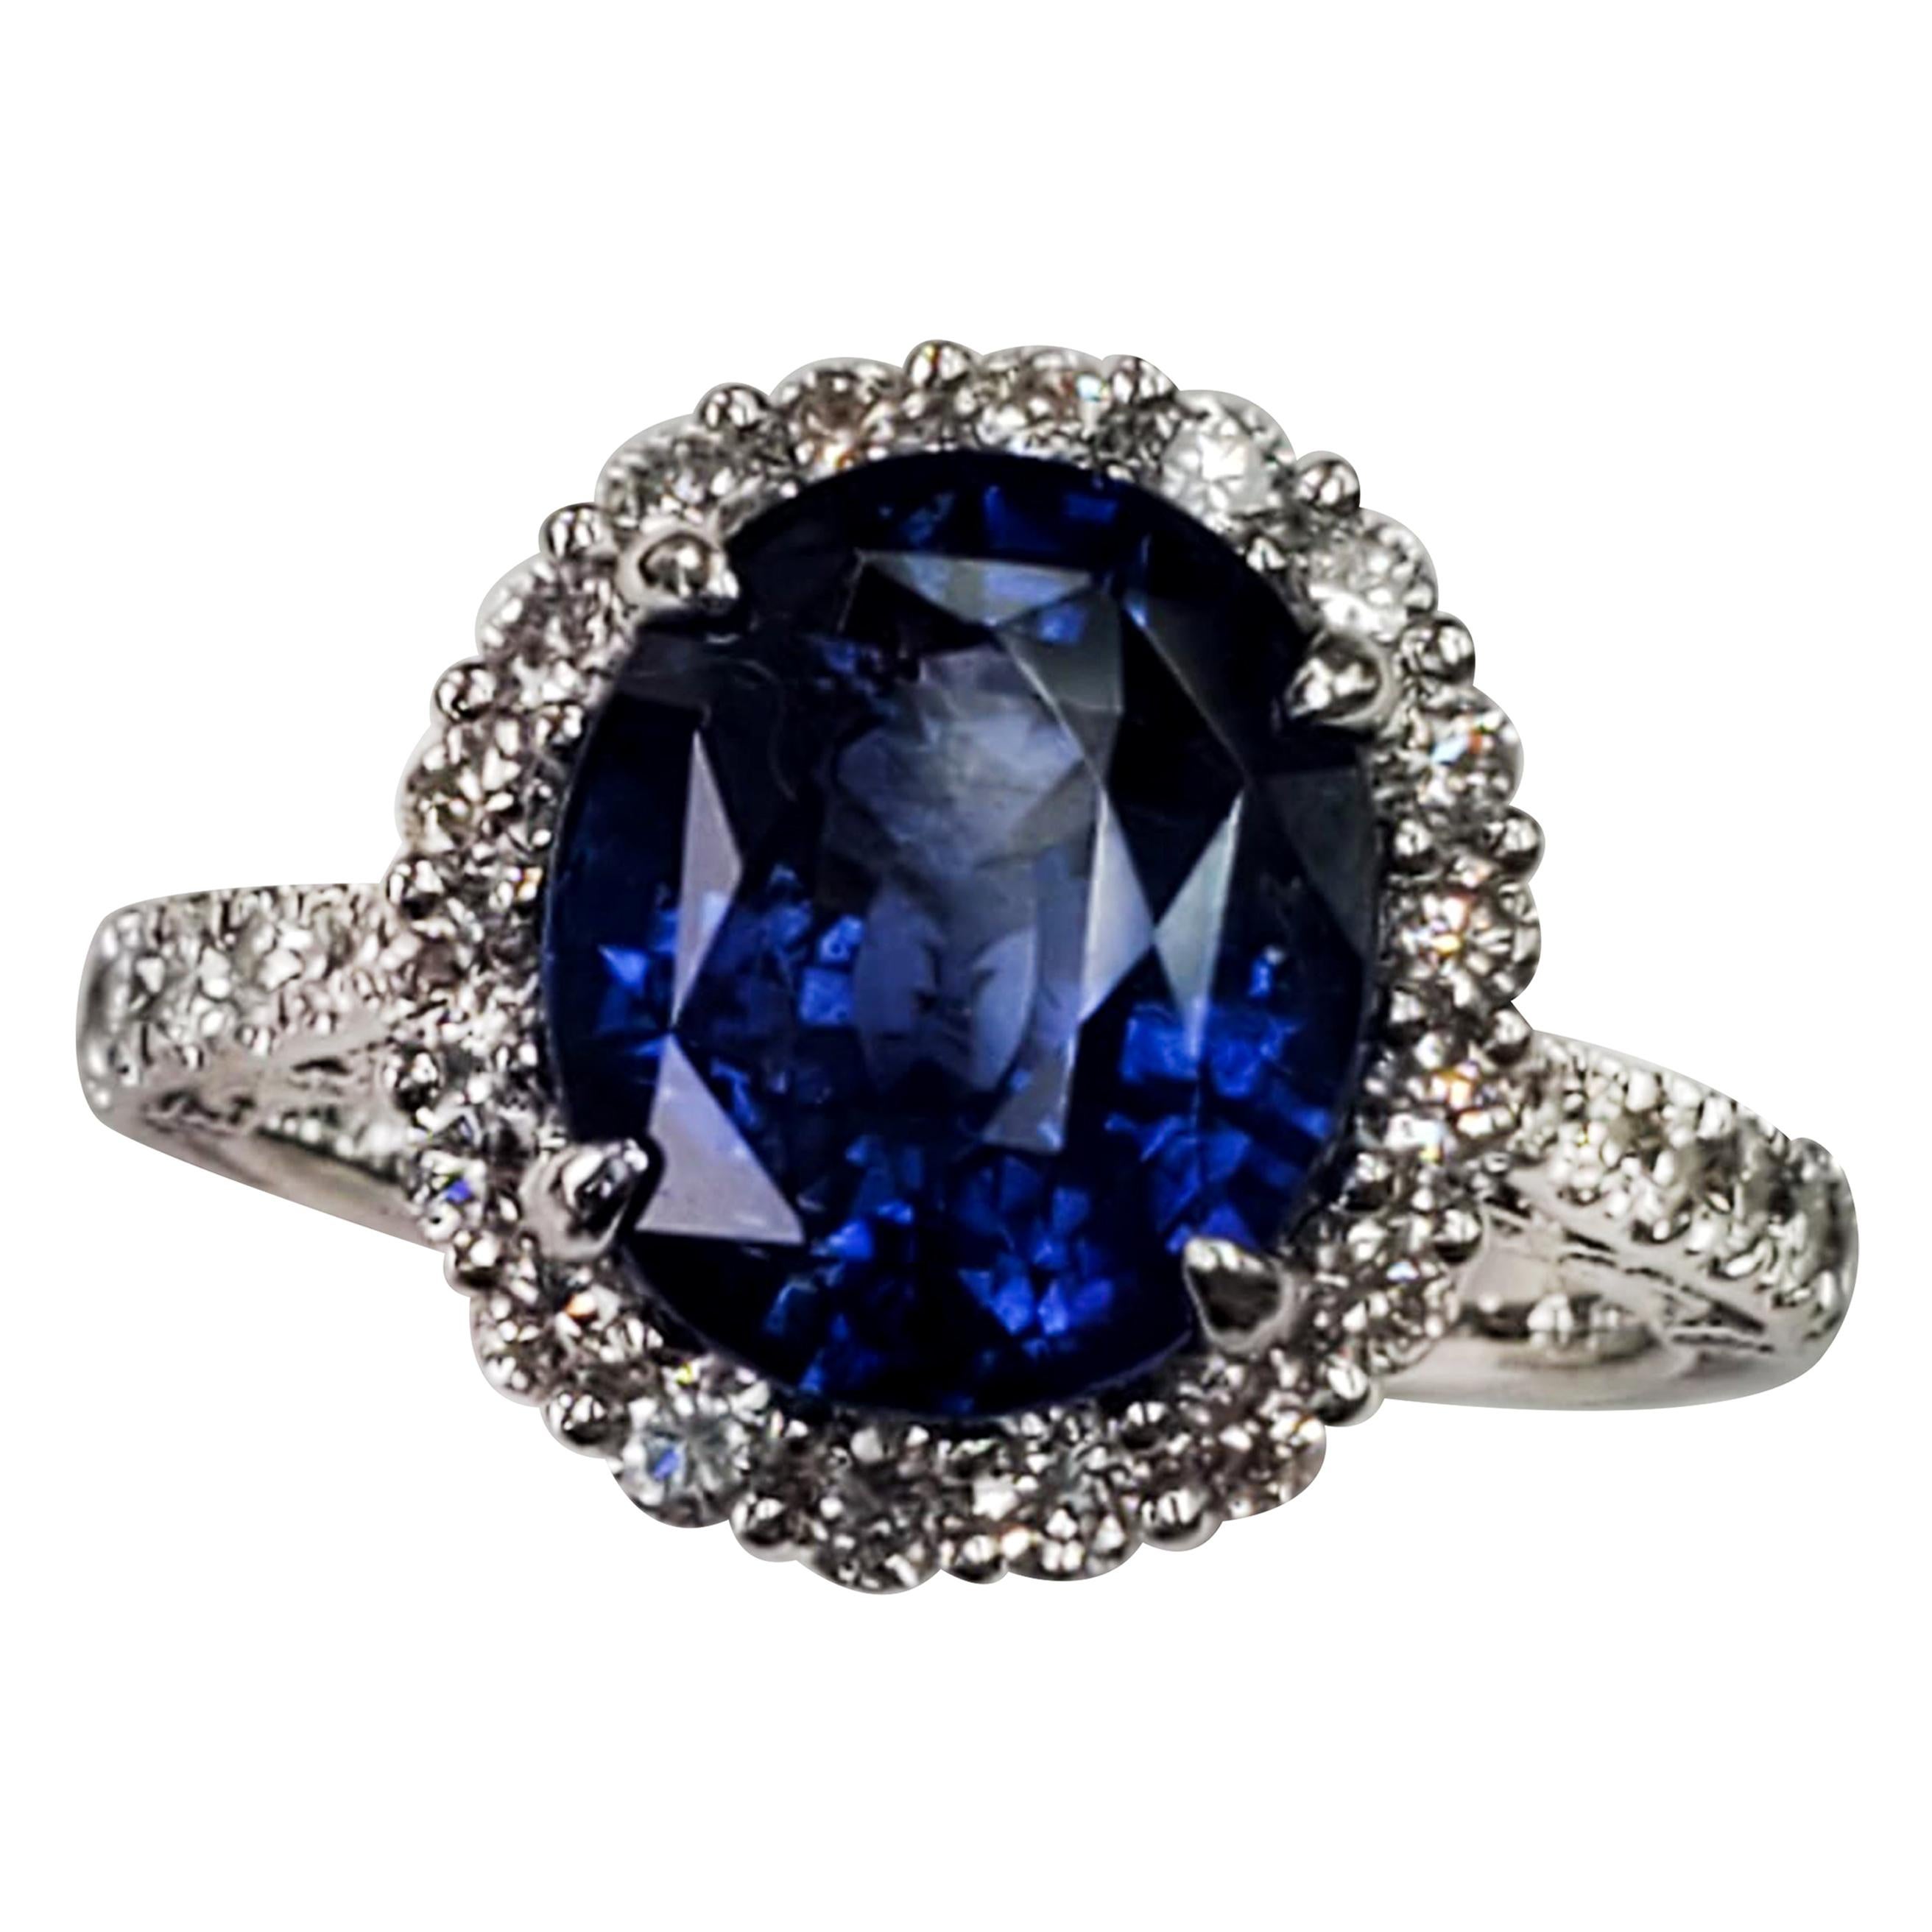 GIA Certified Blue Sapphire Oval Ring with White Diamonds